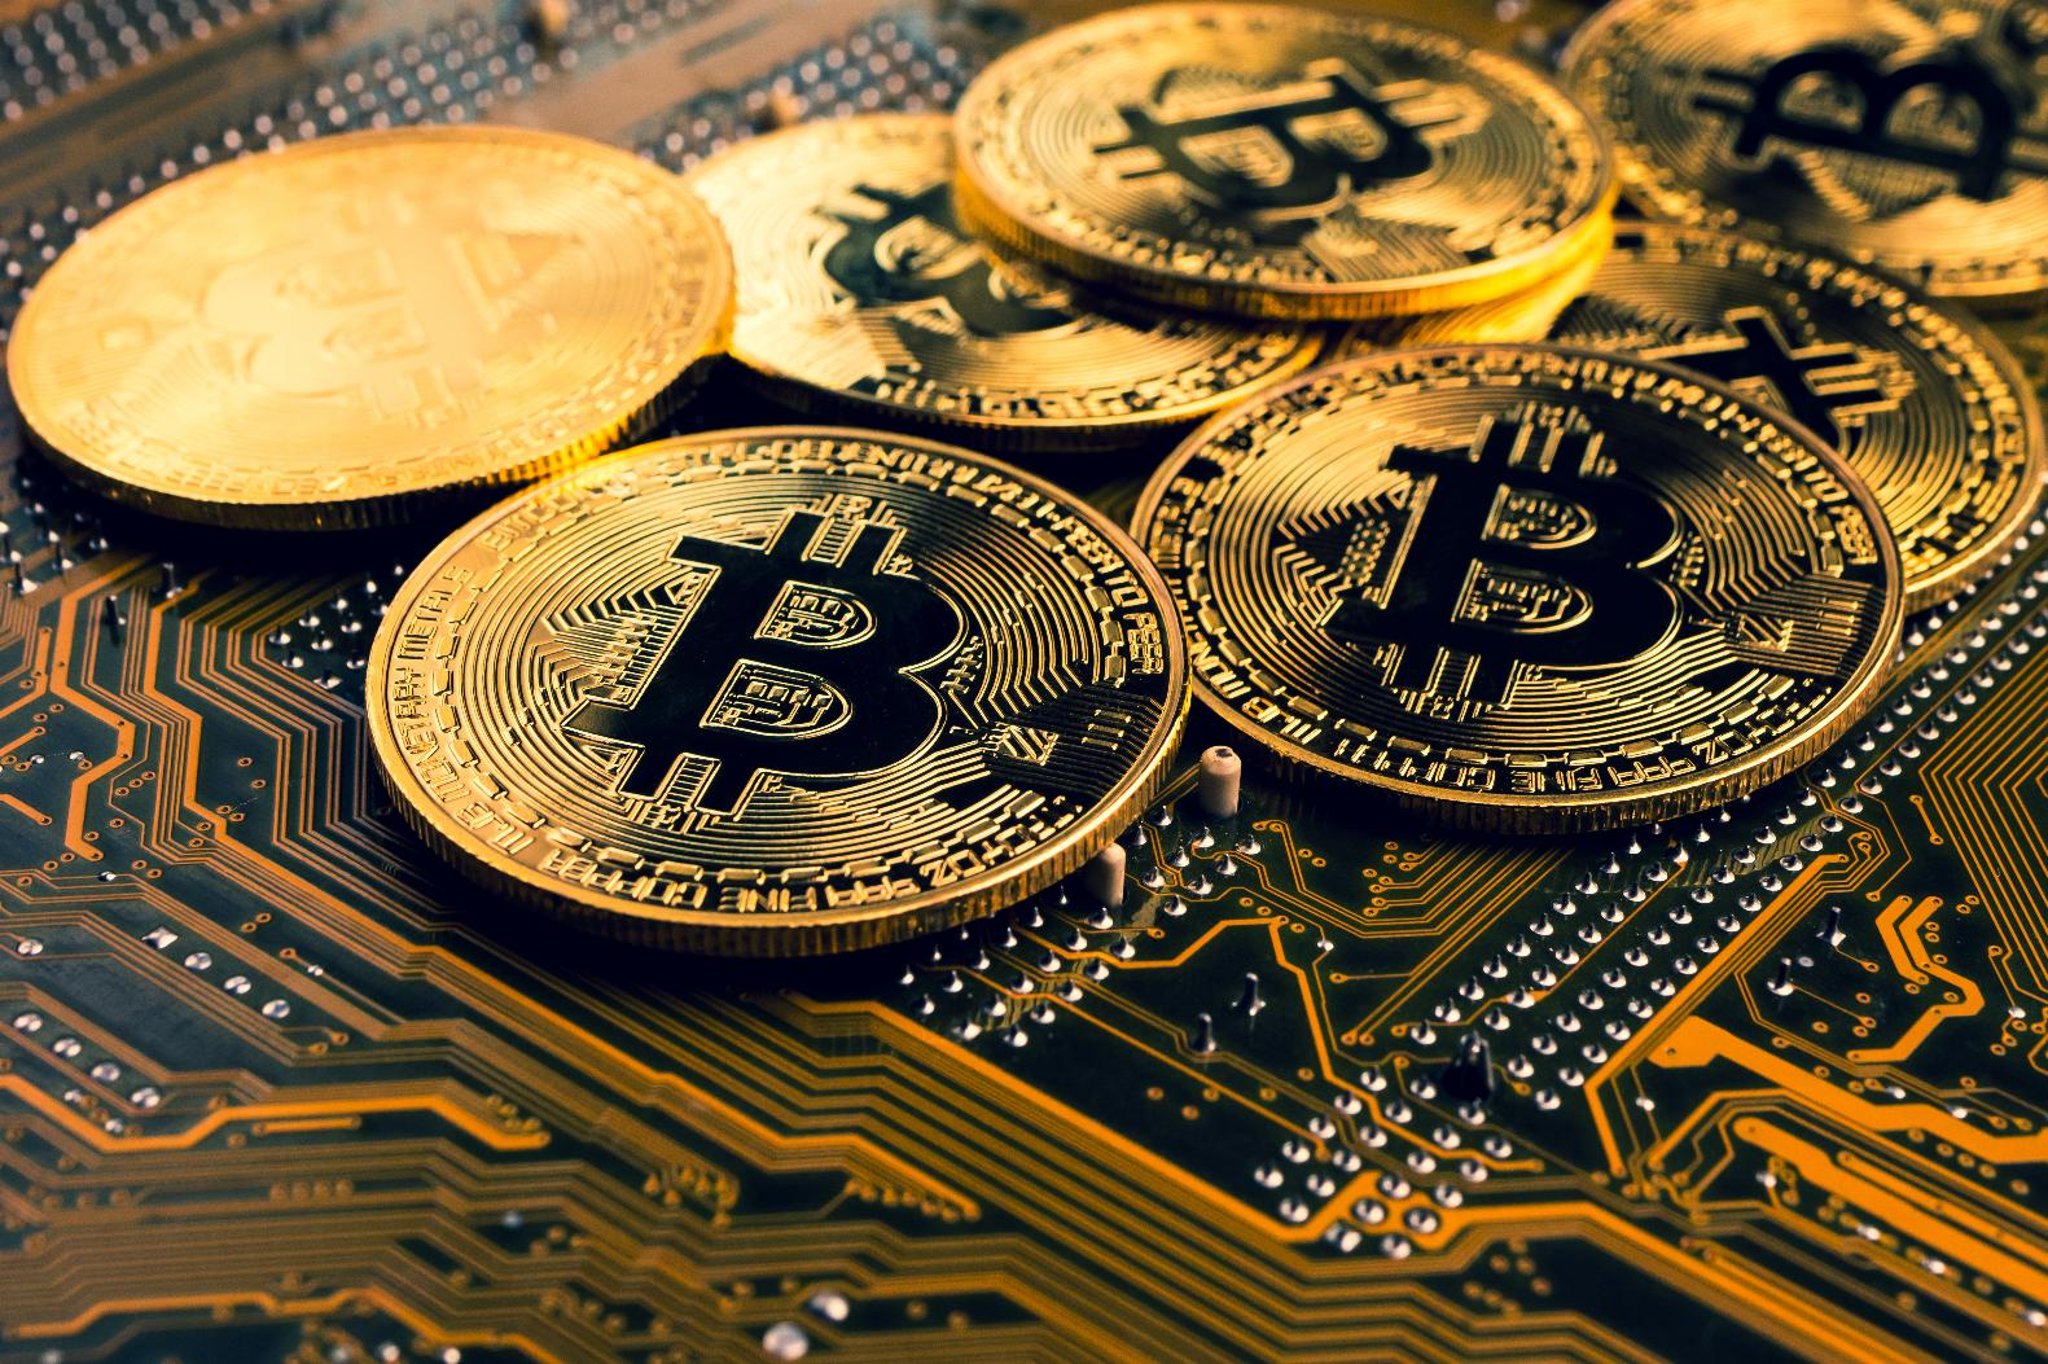 Why is crypto down today? Cryptocurrency market price crash 2022 - Bitcoin, Ethereum, XRP, Dogecoin prices | NationalWorld